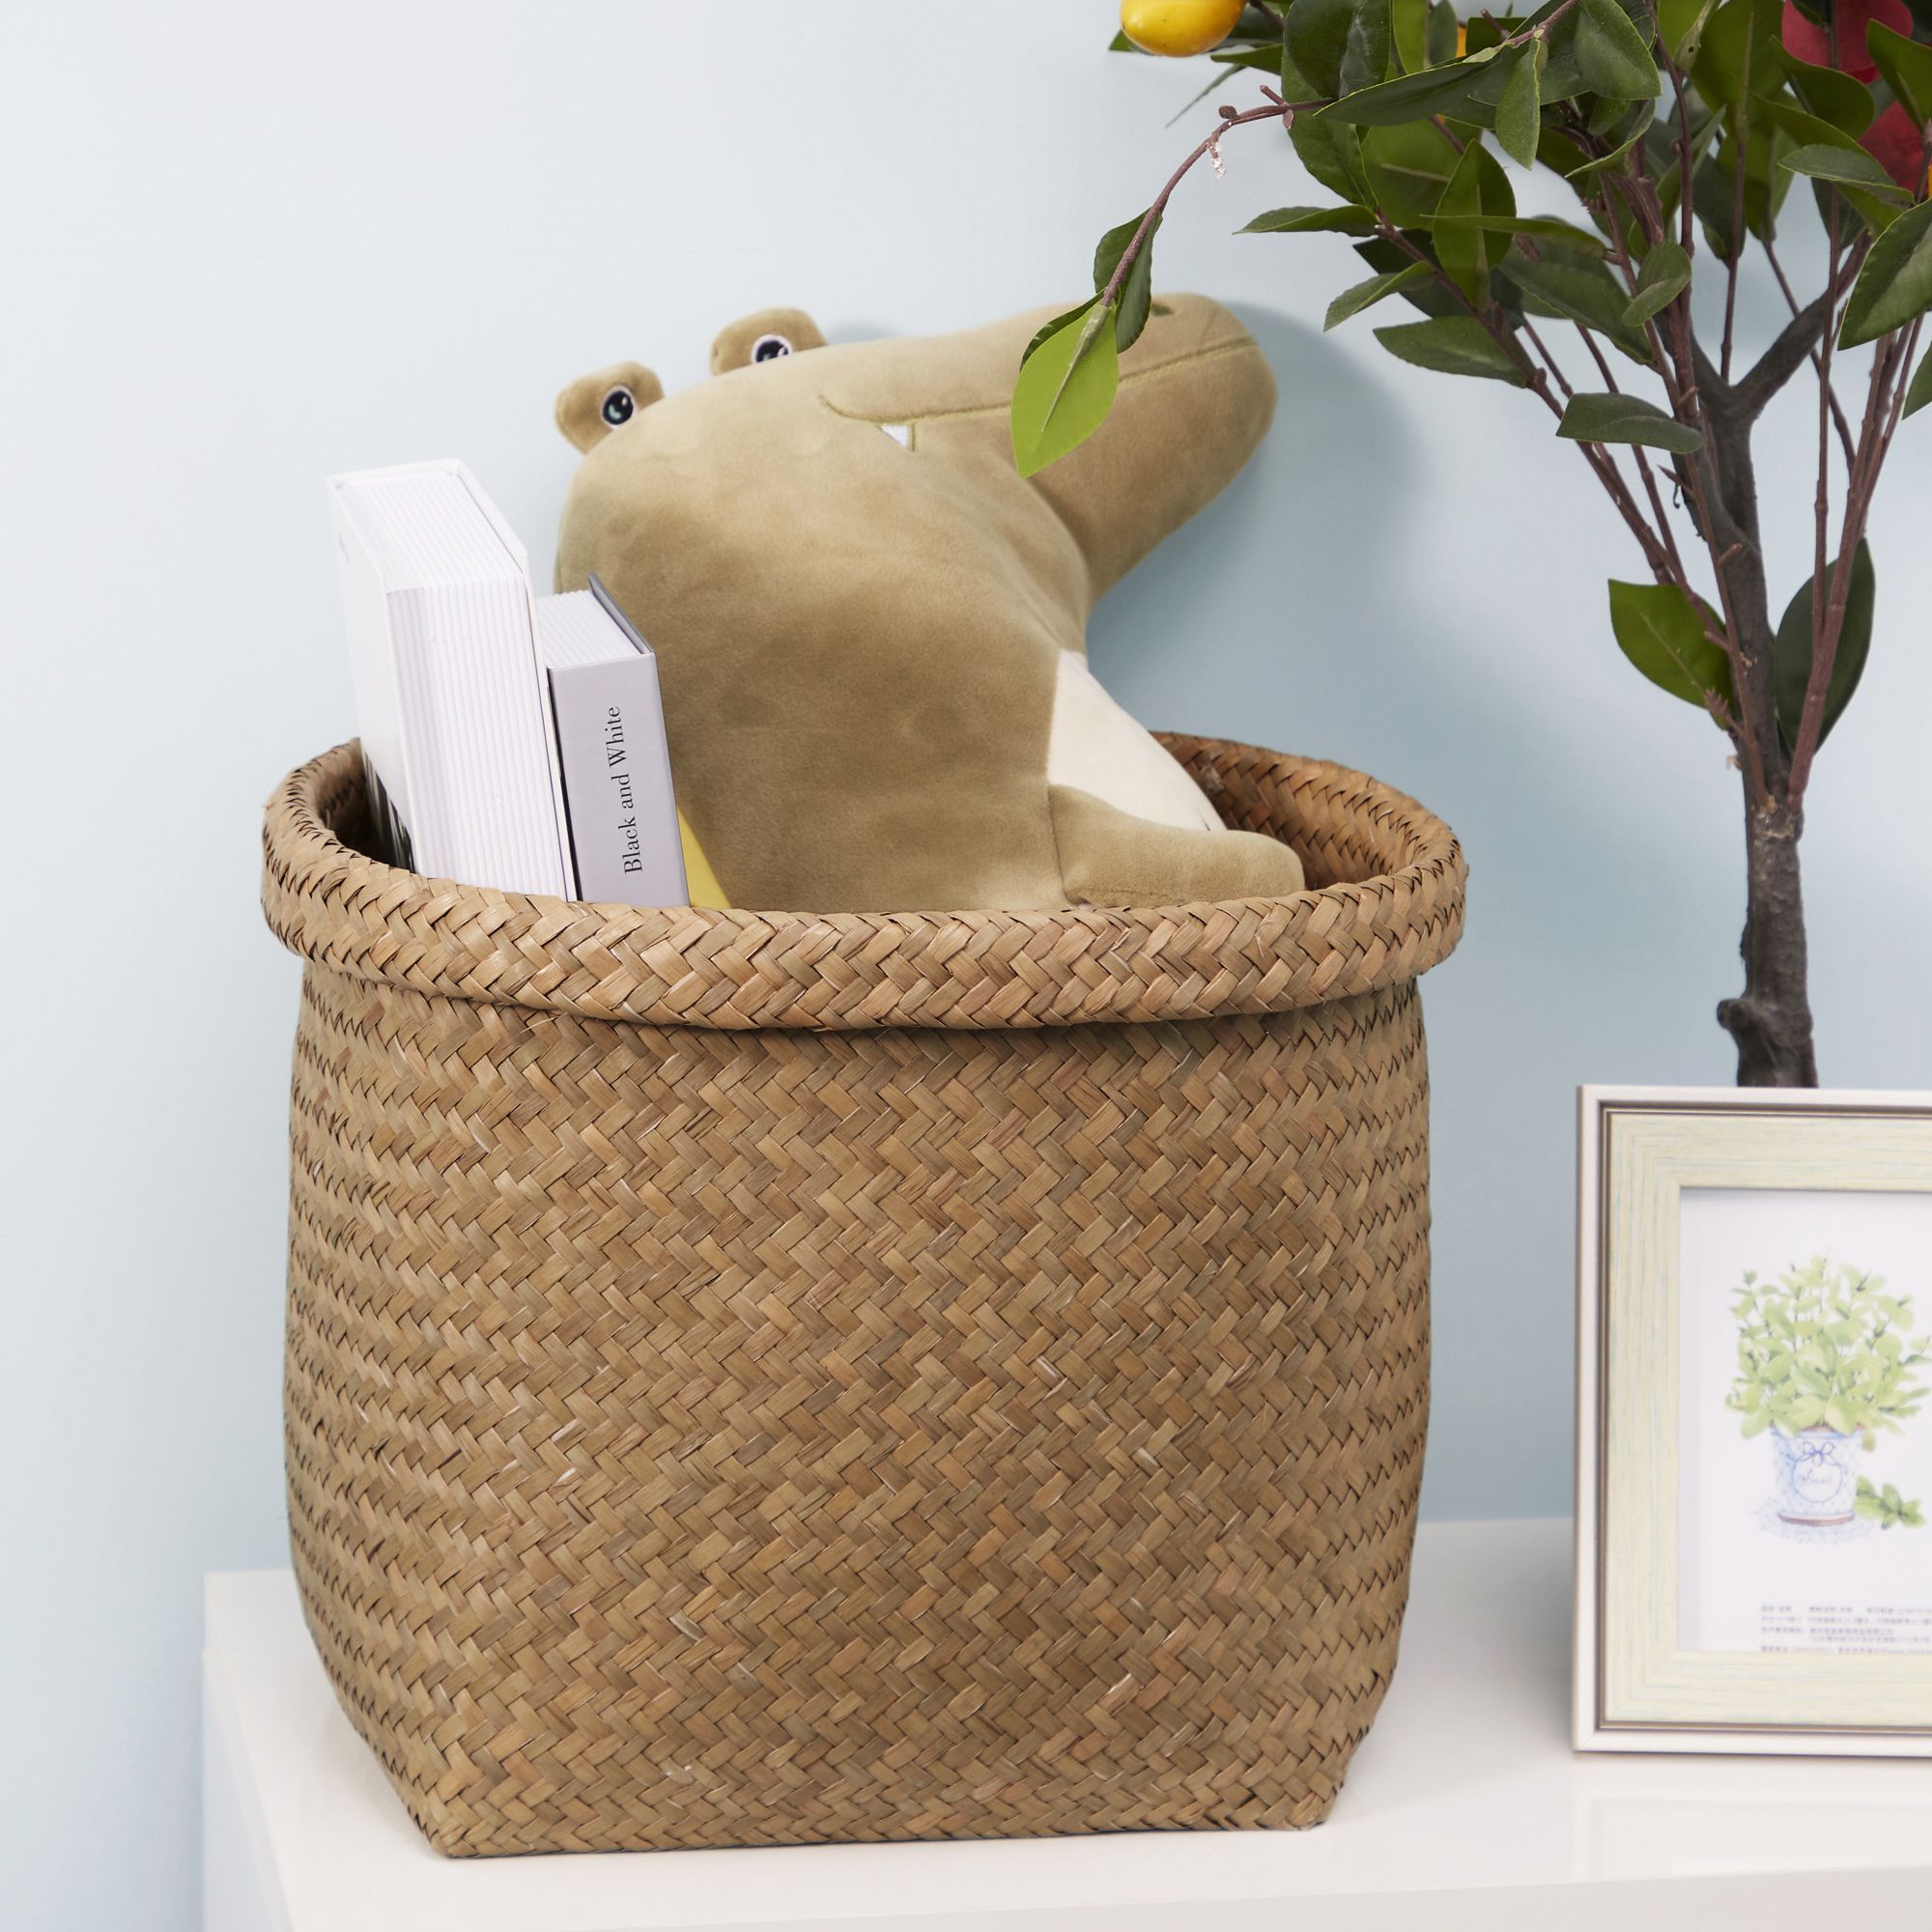 GoodHome Mixxit Curved Natural Seagrass Storage basket (H)30cm (W)30cm (D)30cm